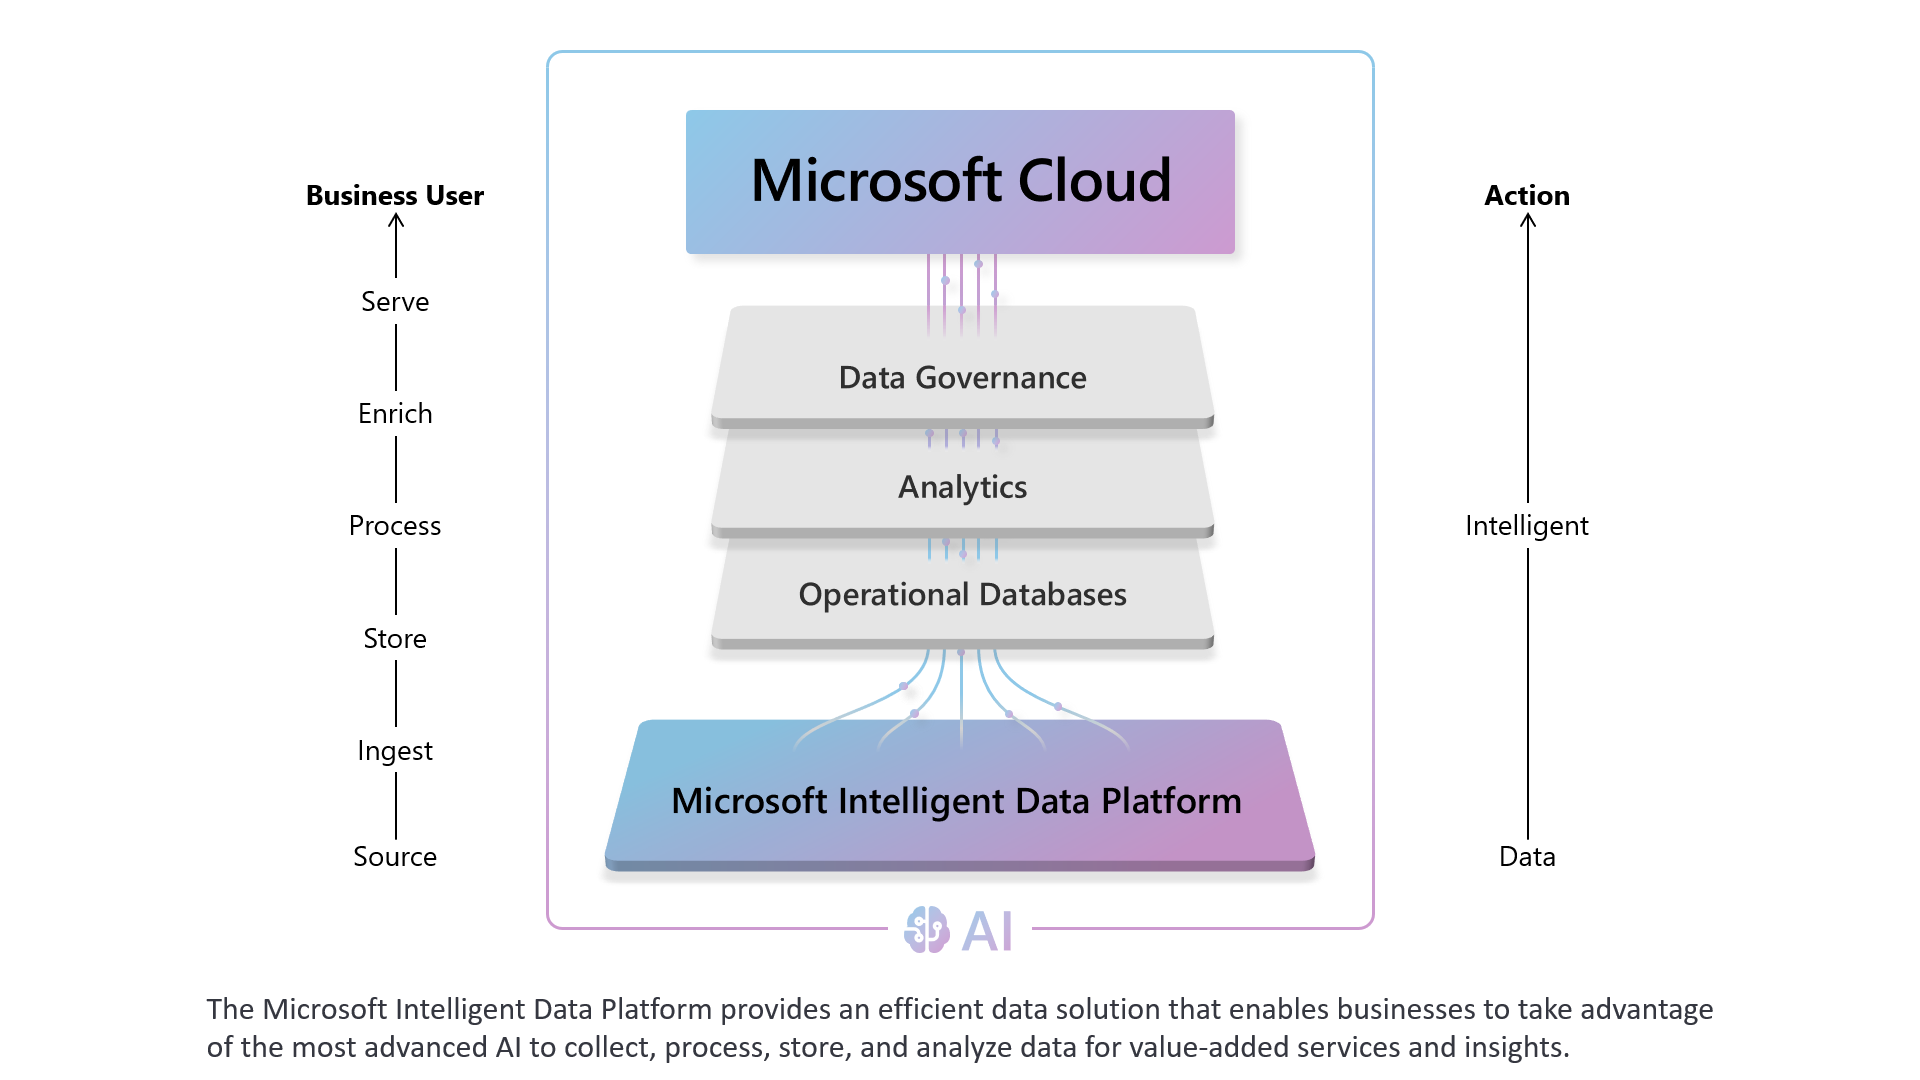 System Architectures of Microsoft Cloud to AI